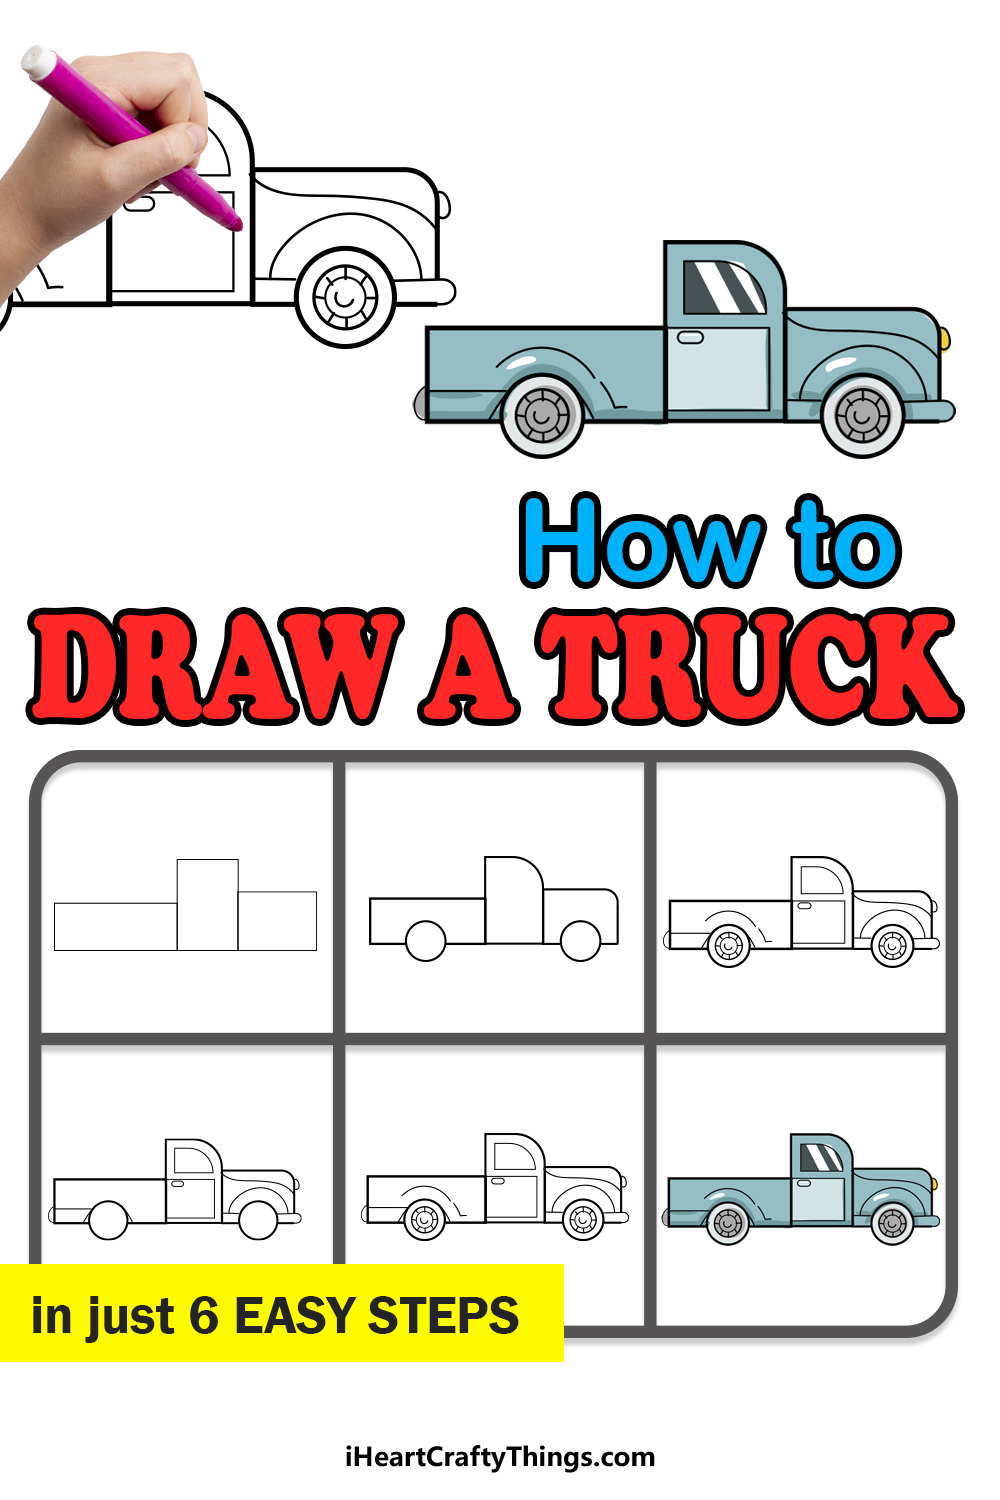 how to draw a truck in 6 easy steps